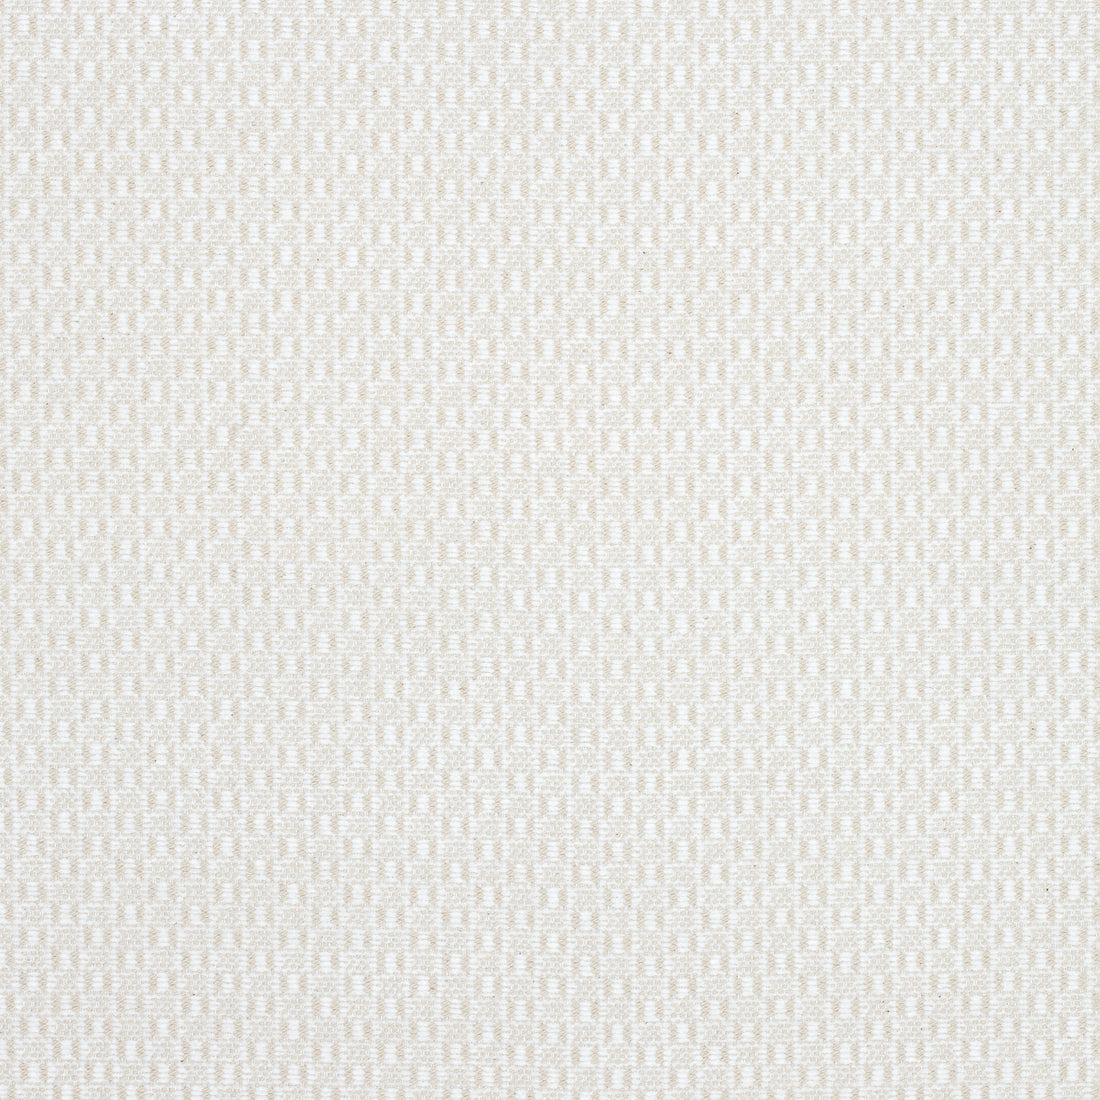 Emilie fabric in flax color - pattern number W789139 - by Thibaut in the Reverie collection